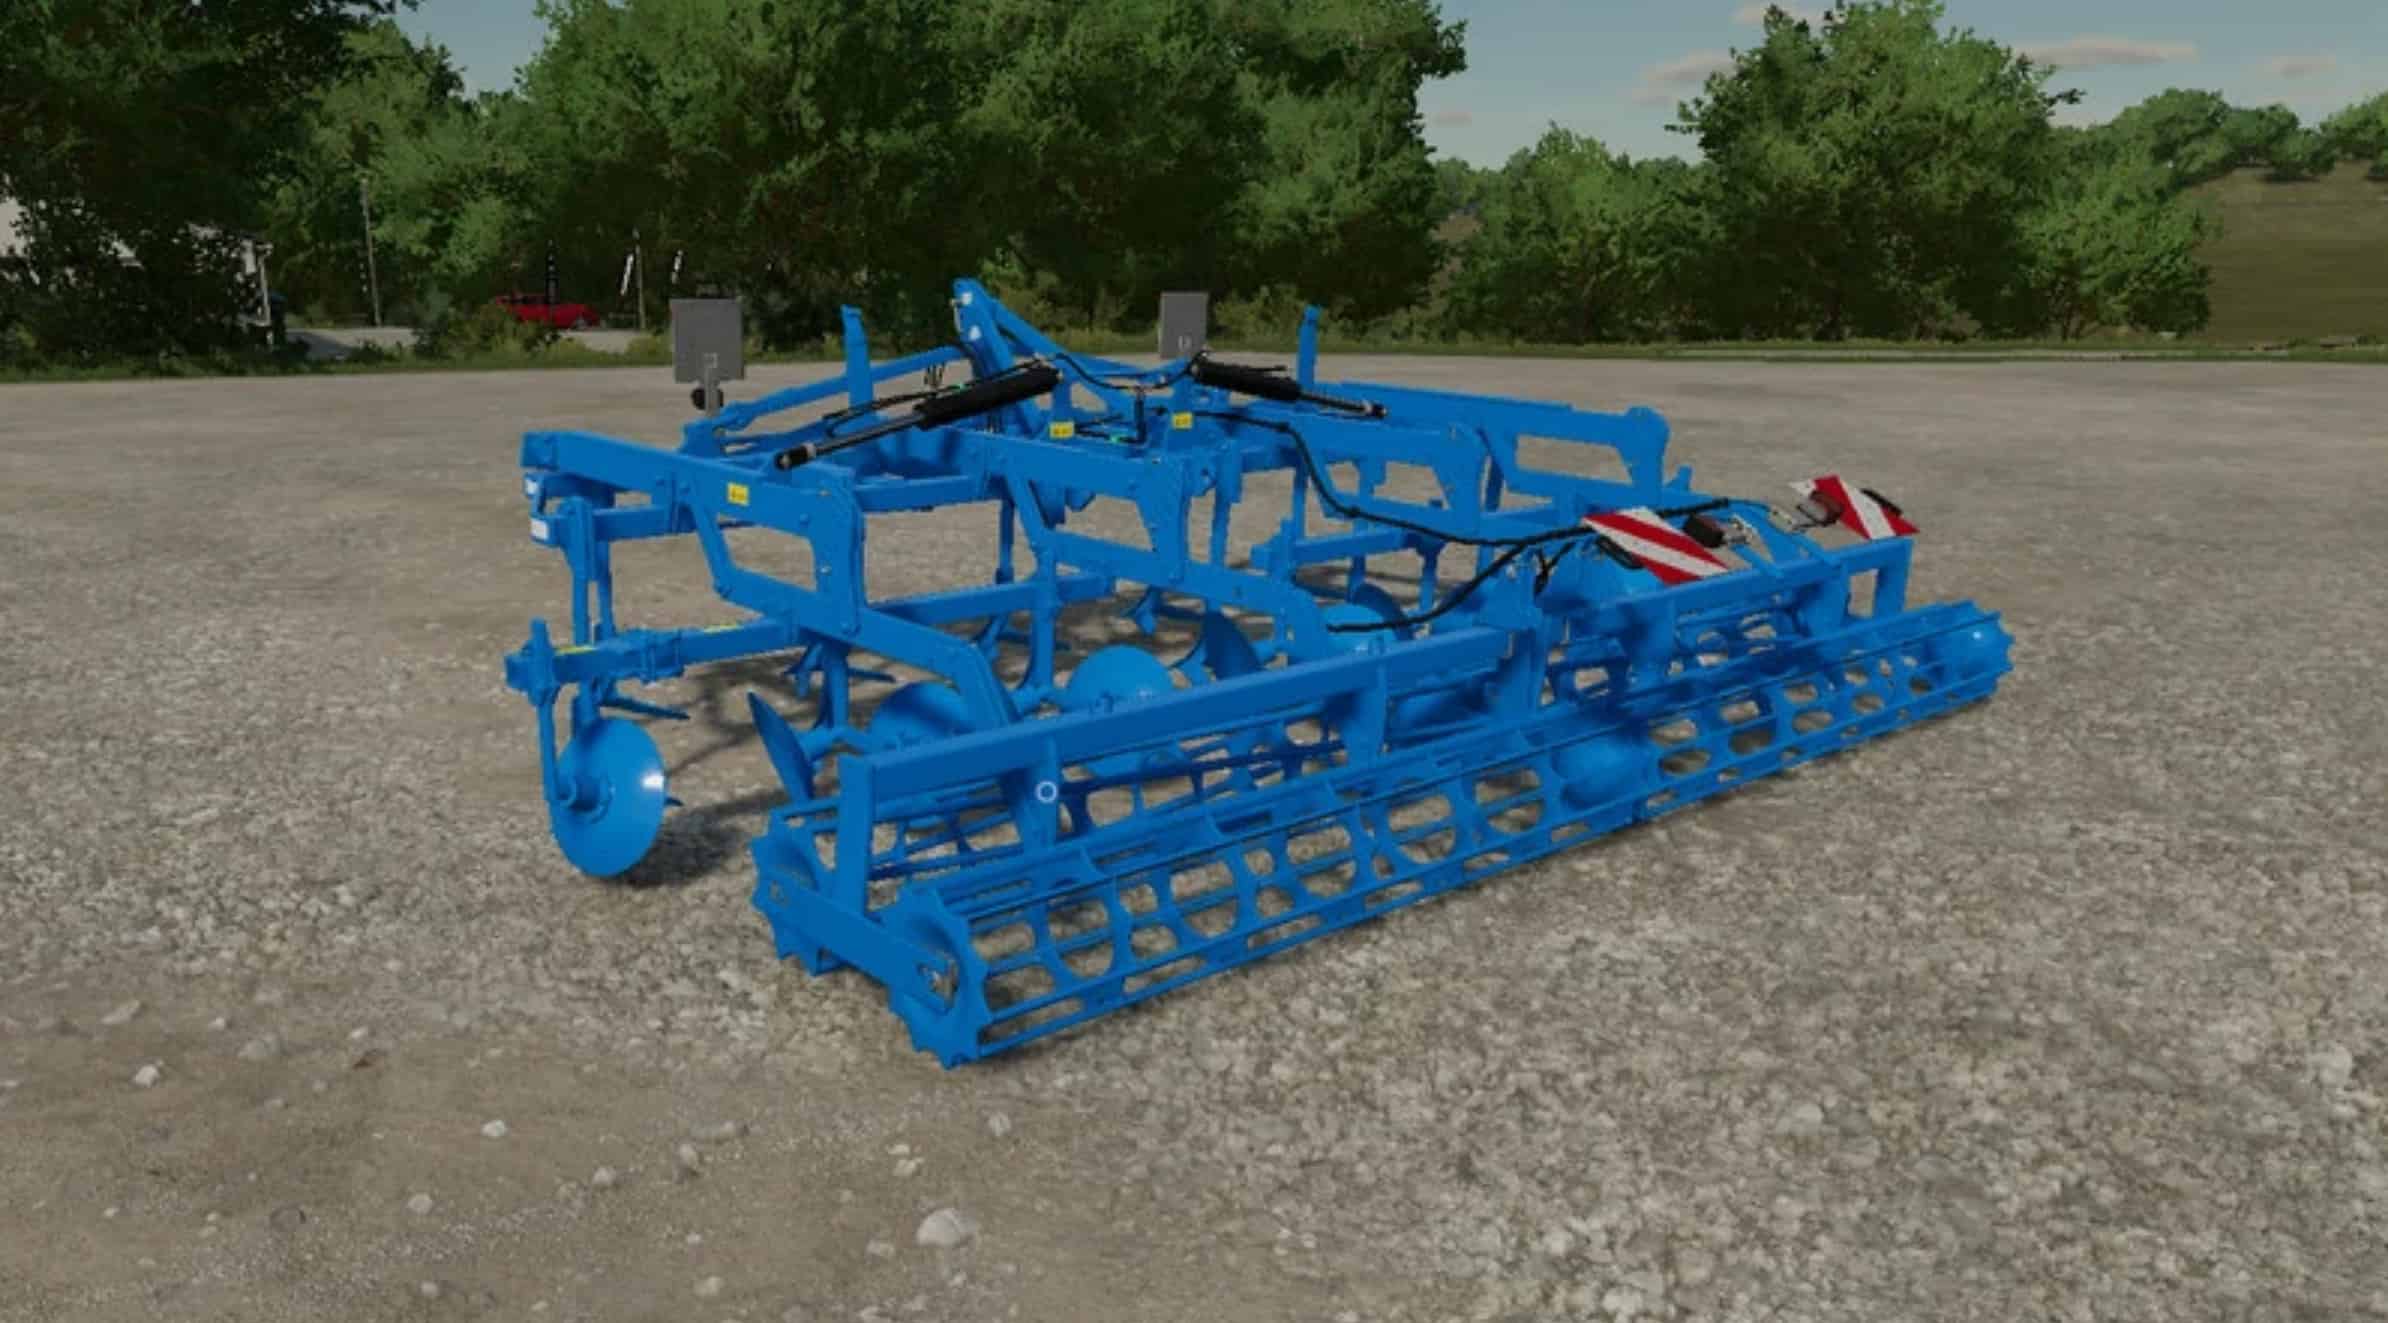 Fs22 Cultivator With Plow Function V1000 Fs 22 Implements And Tools Mod Download 2475